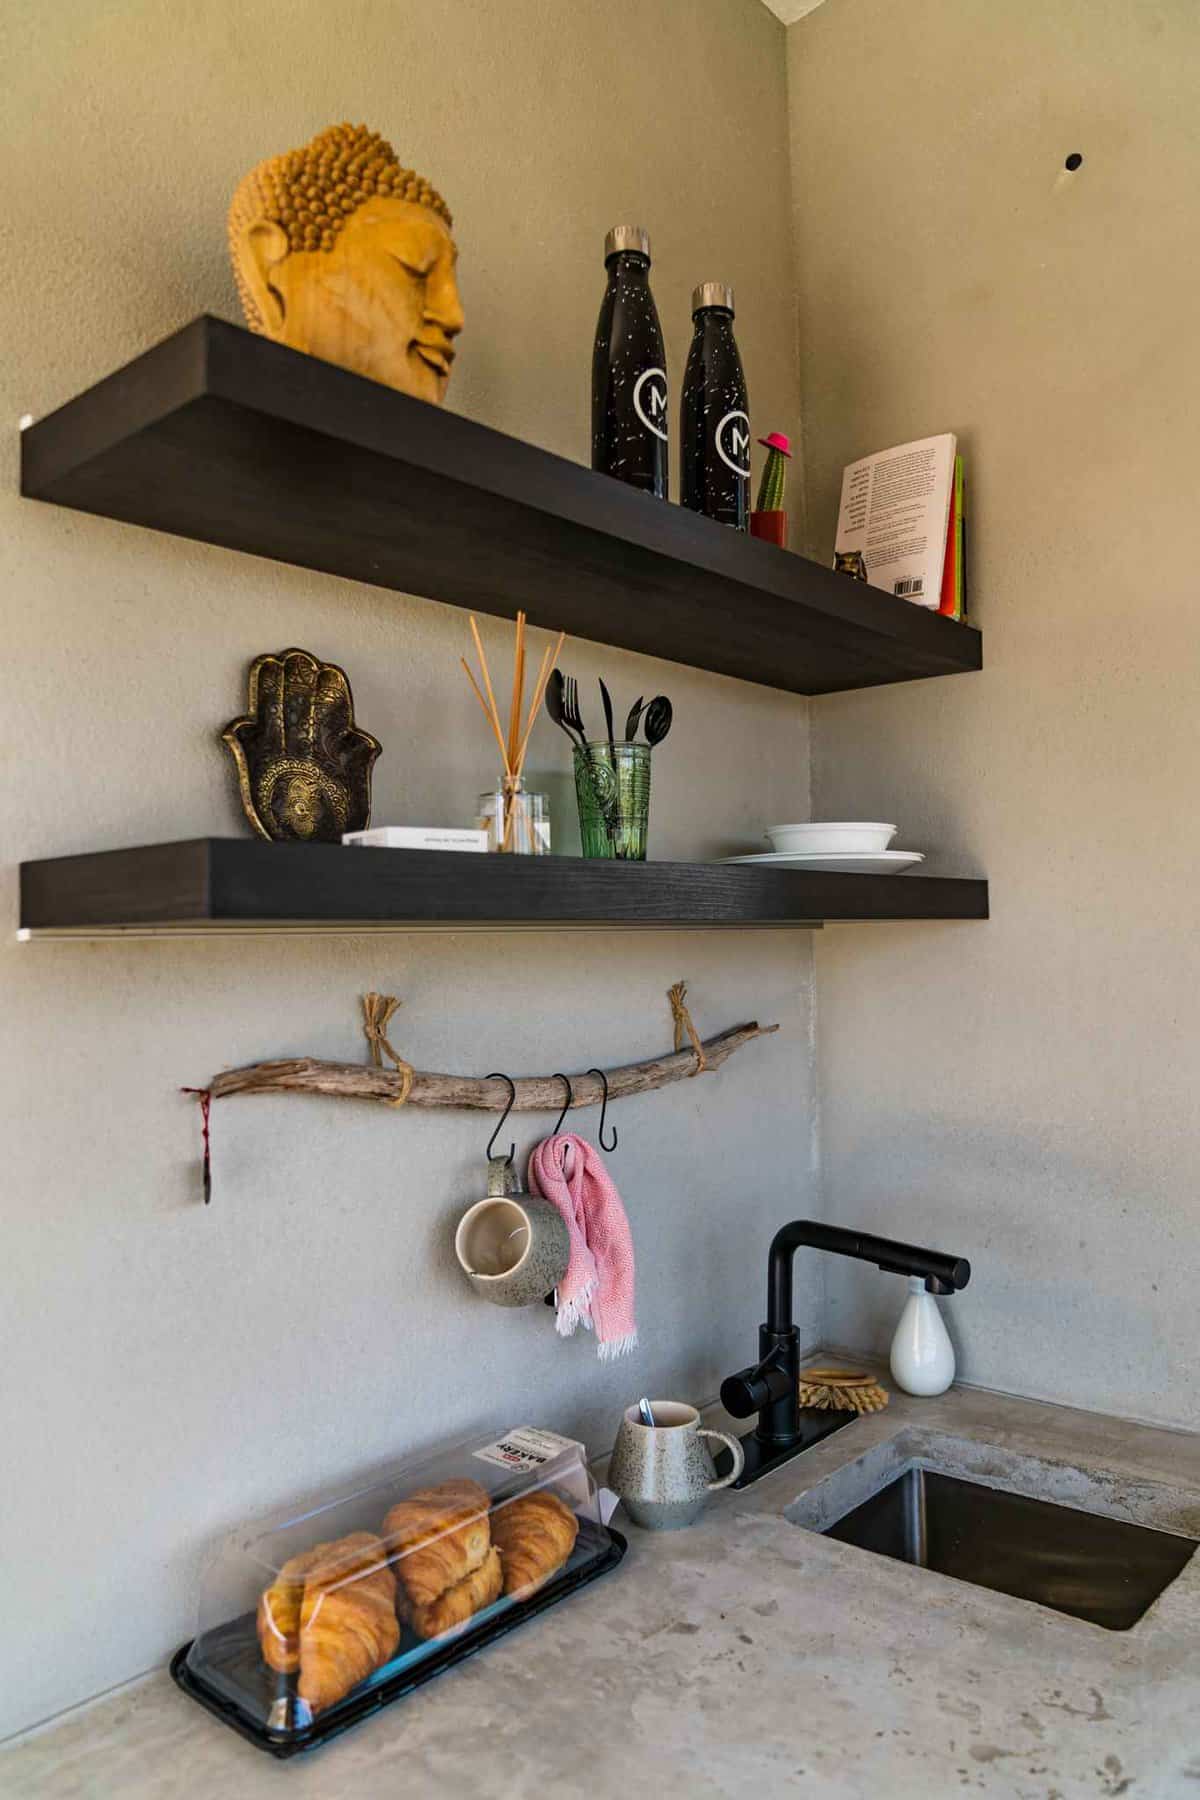 Sink Area with Hanging Shelves